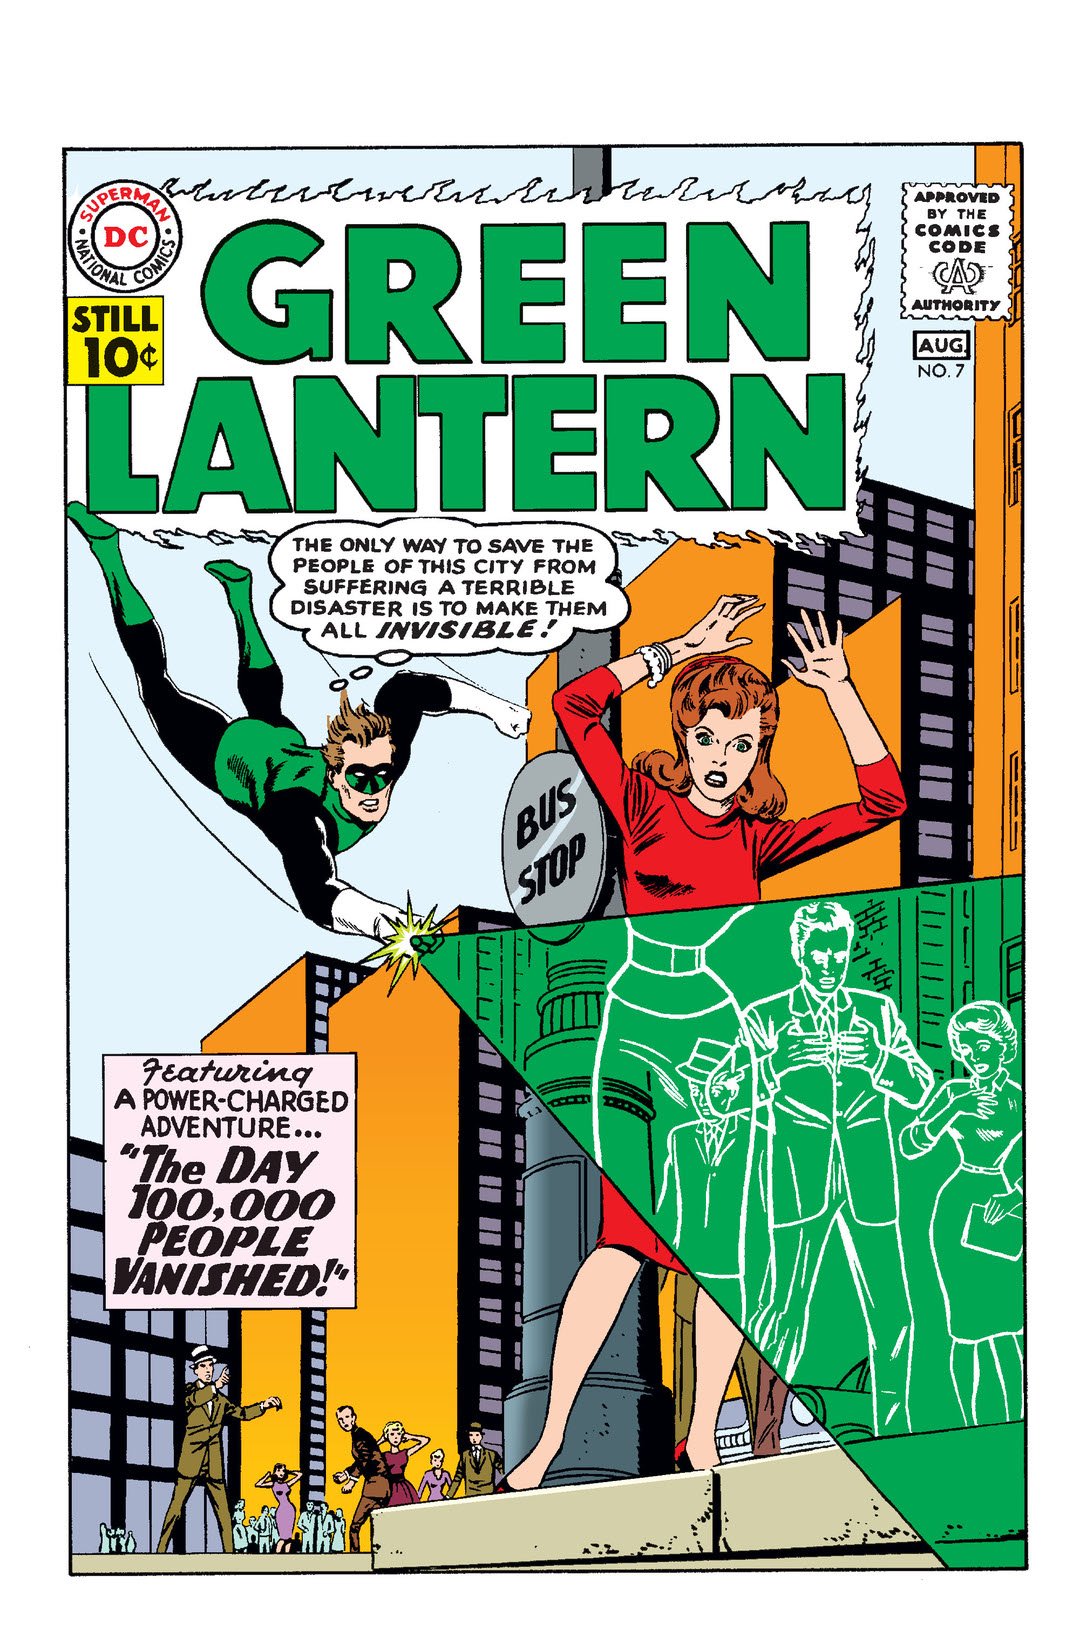 Green Lantern (1960-) #7 preview images